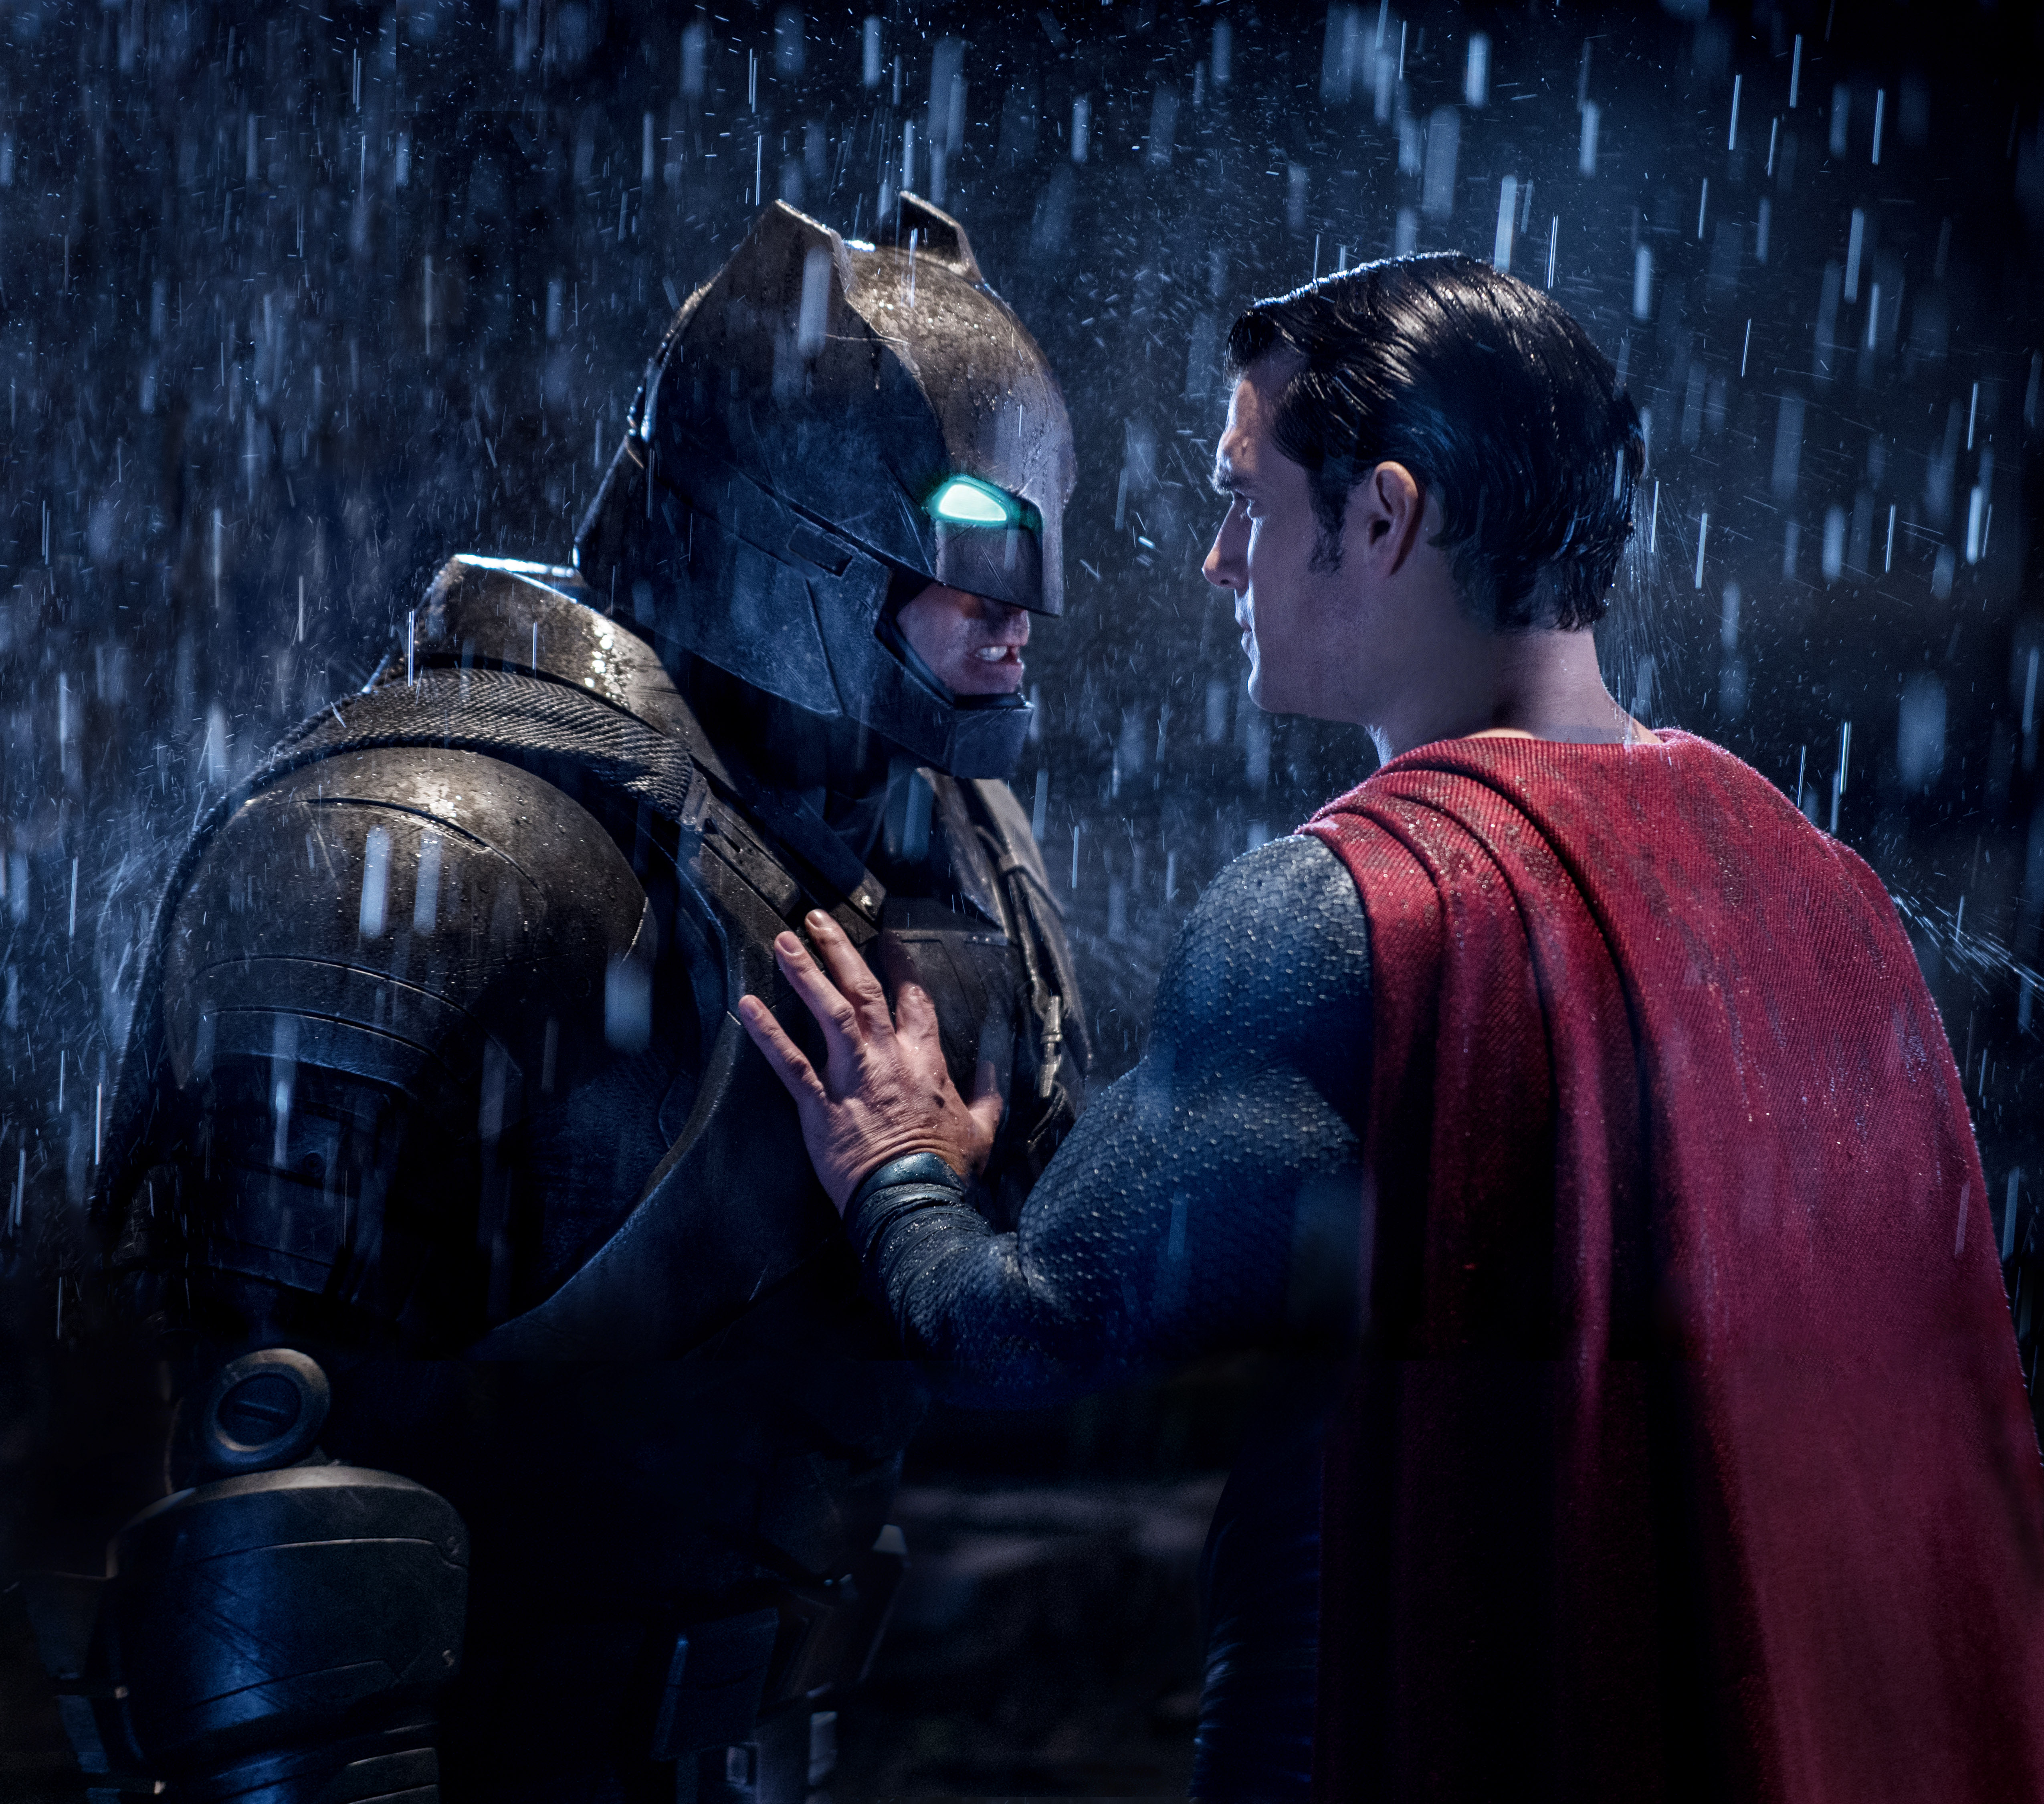 Featured image of Batman v Superman: Dawn of Justice